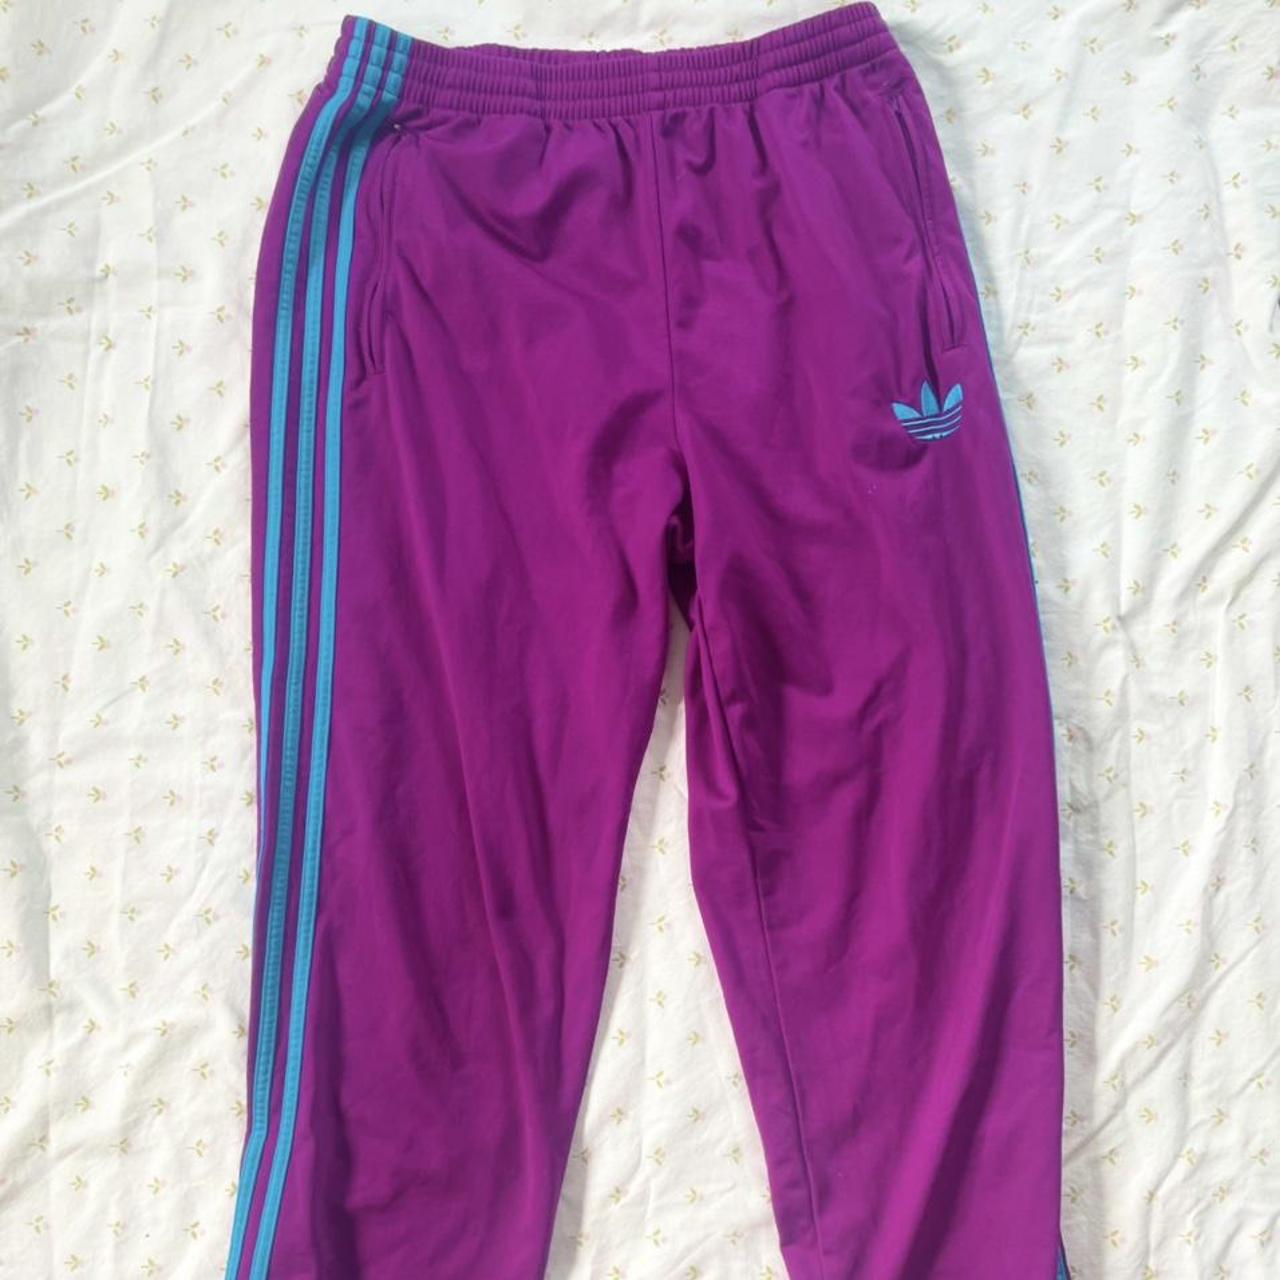 💜 Funky Adidas purple track pants with bright blue... - Depop